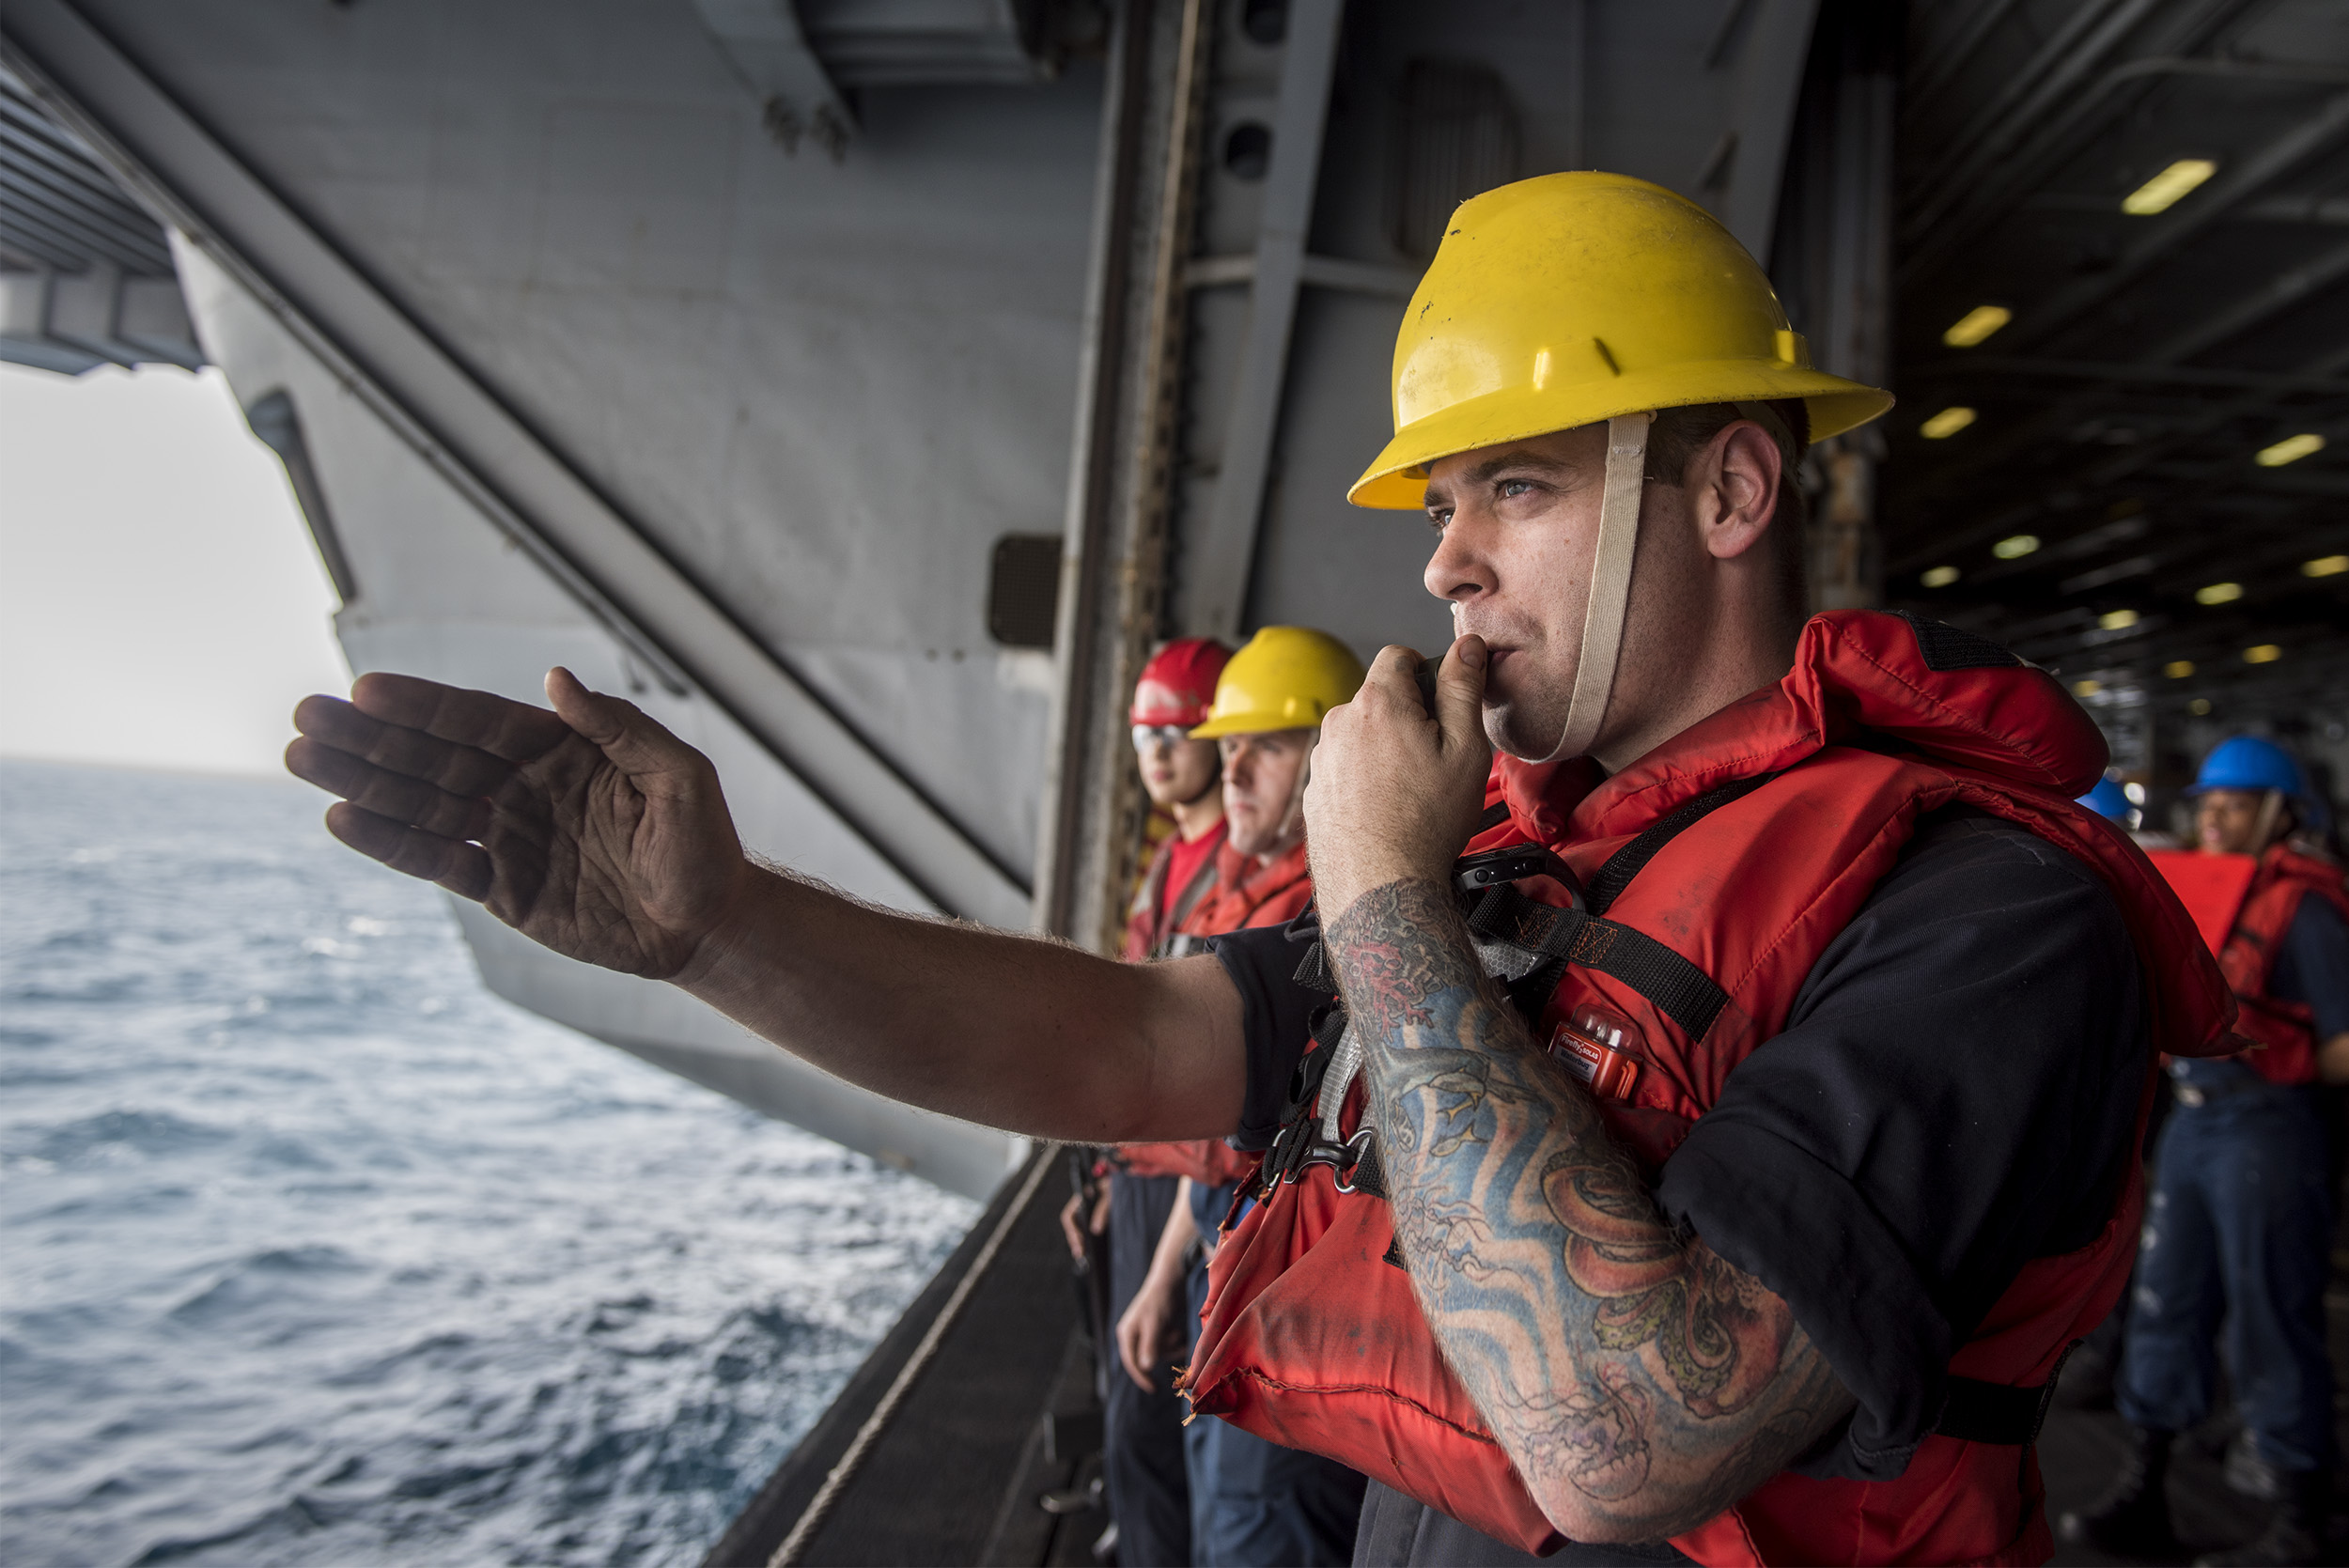 Sailor thrilled with Navys revisions to tattoo policy  13newsnowcom